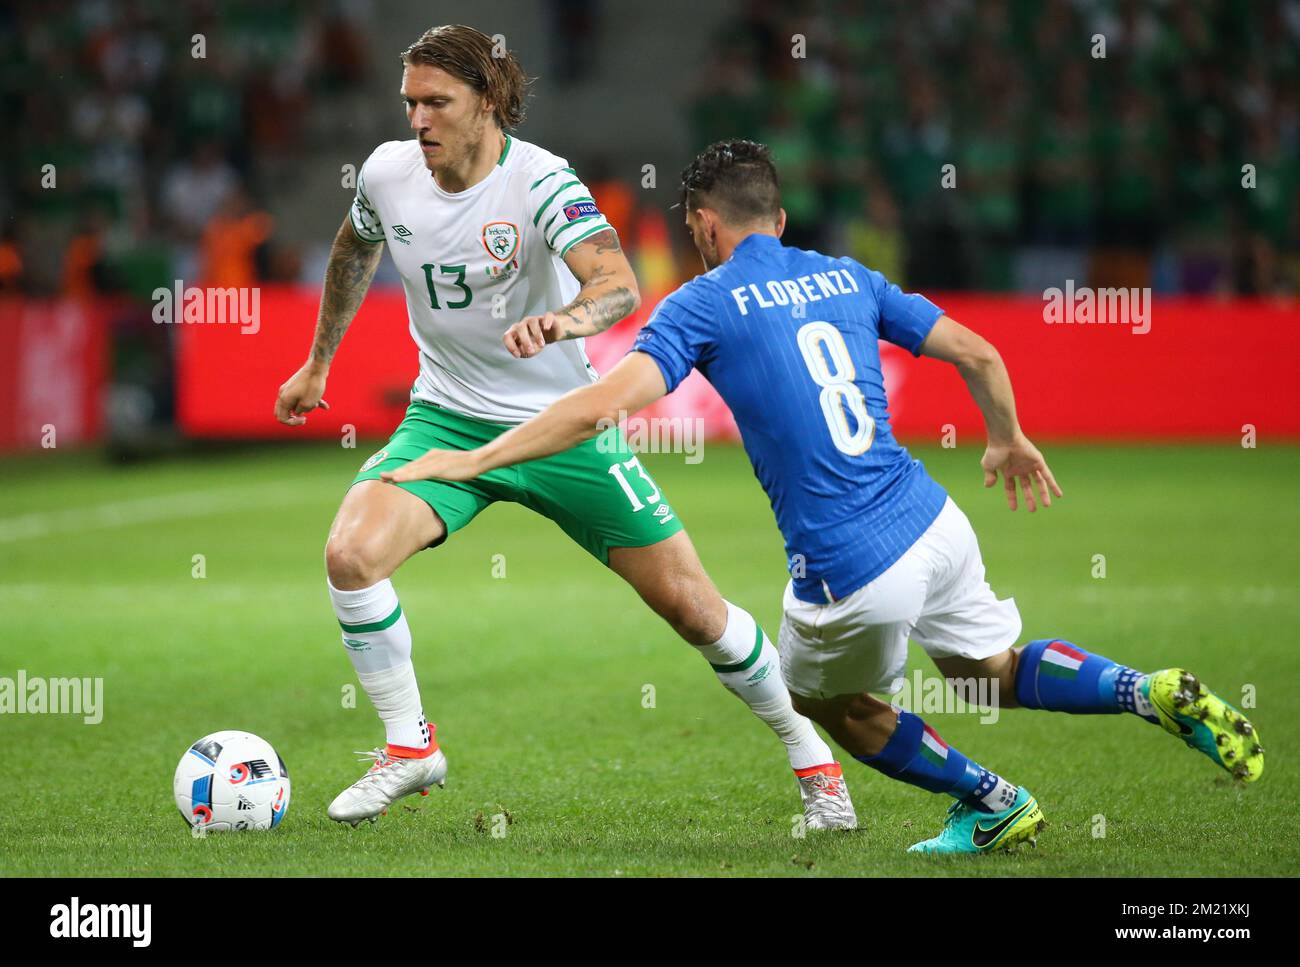 Ireland's Jeff Hendrick and Italy's Alessandro Florenzi fight for the ball during a soccer game between Ireland and Italy, in group E of the group stage of the UEFA Euro 2016 European Championships, Wednesday 22 June 2016 in Villeneuve-d'Ascq, France.  Stock Photo